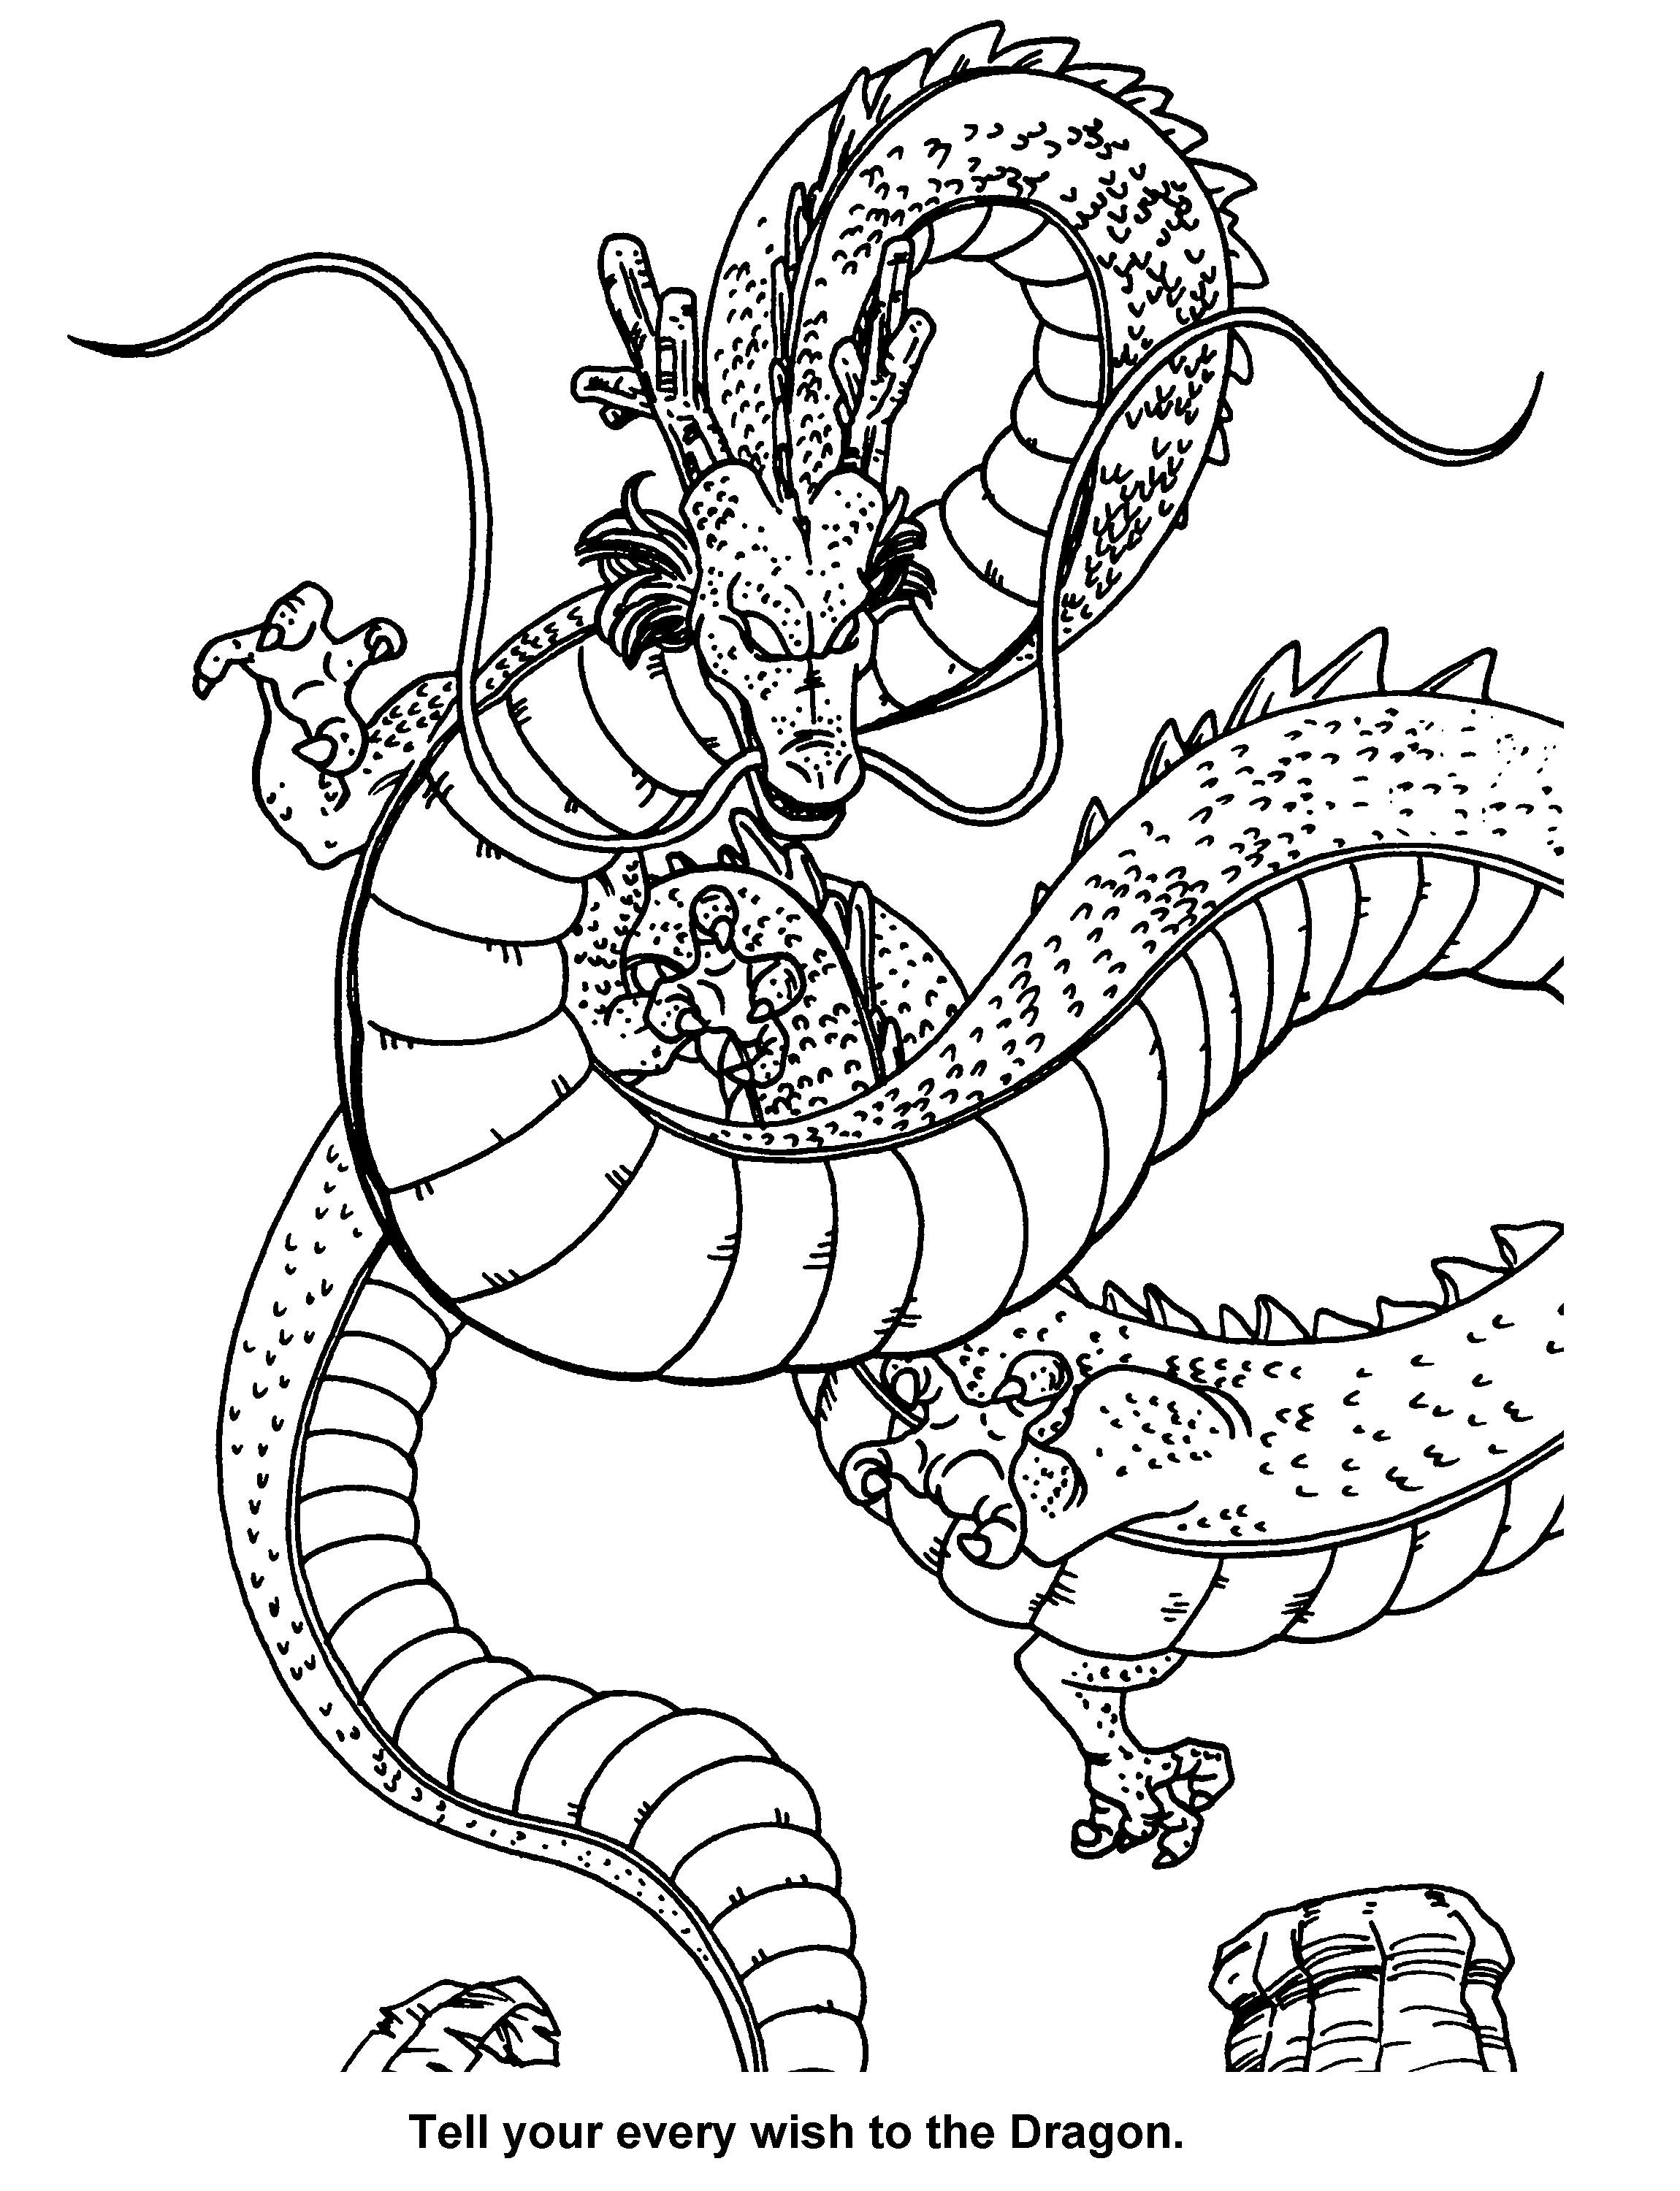 Free dragonball z coloring pages